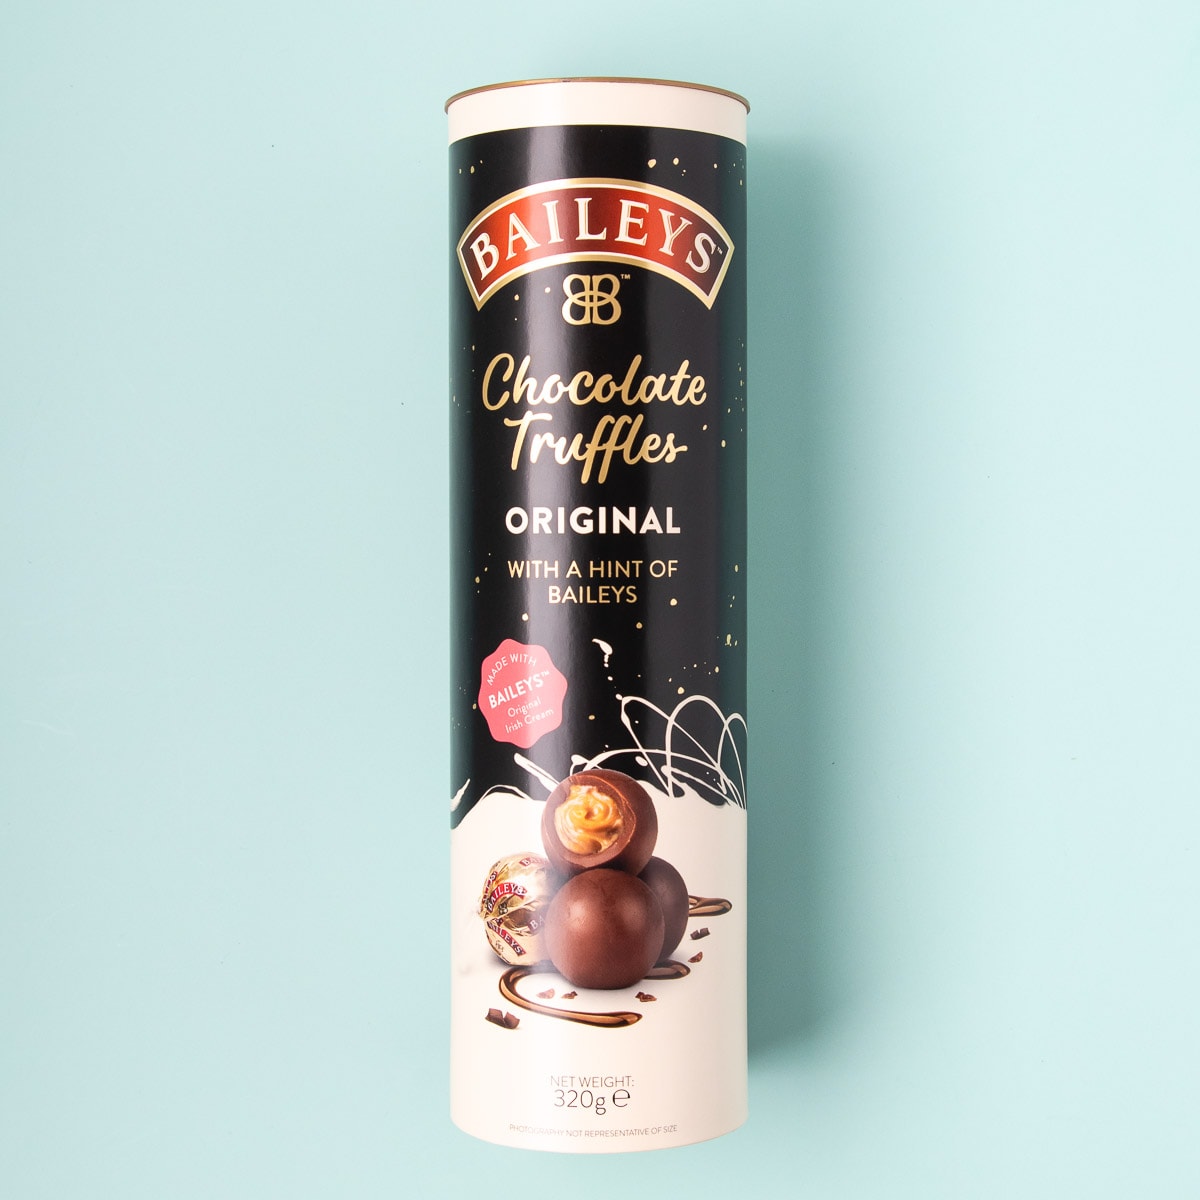 A tall tube-shaped container of Baileys chocolate truffles, on a mint green background.